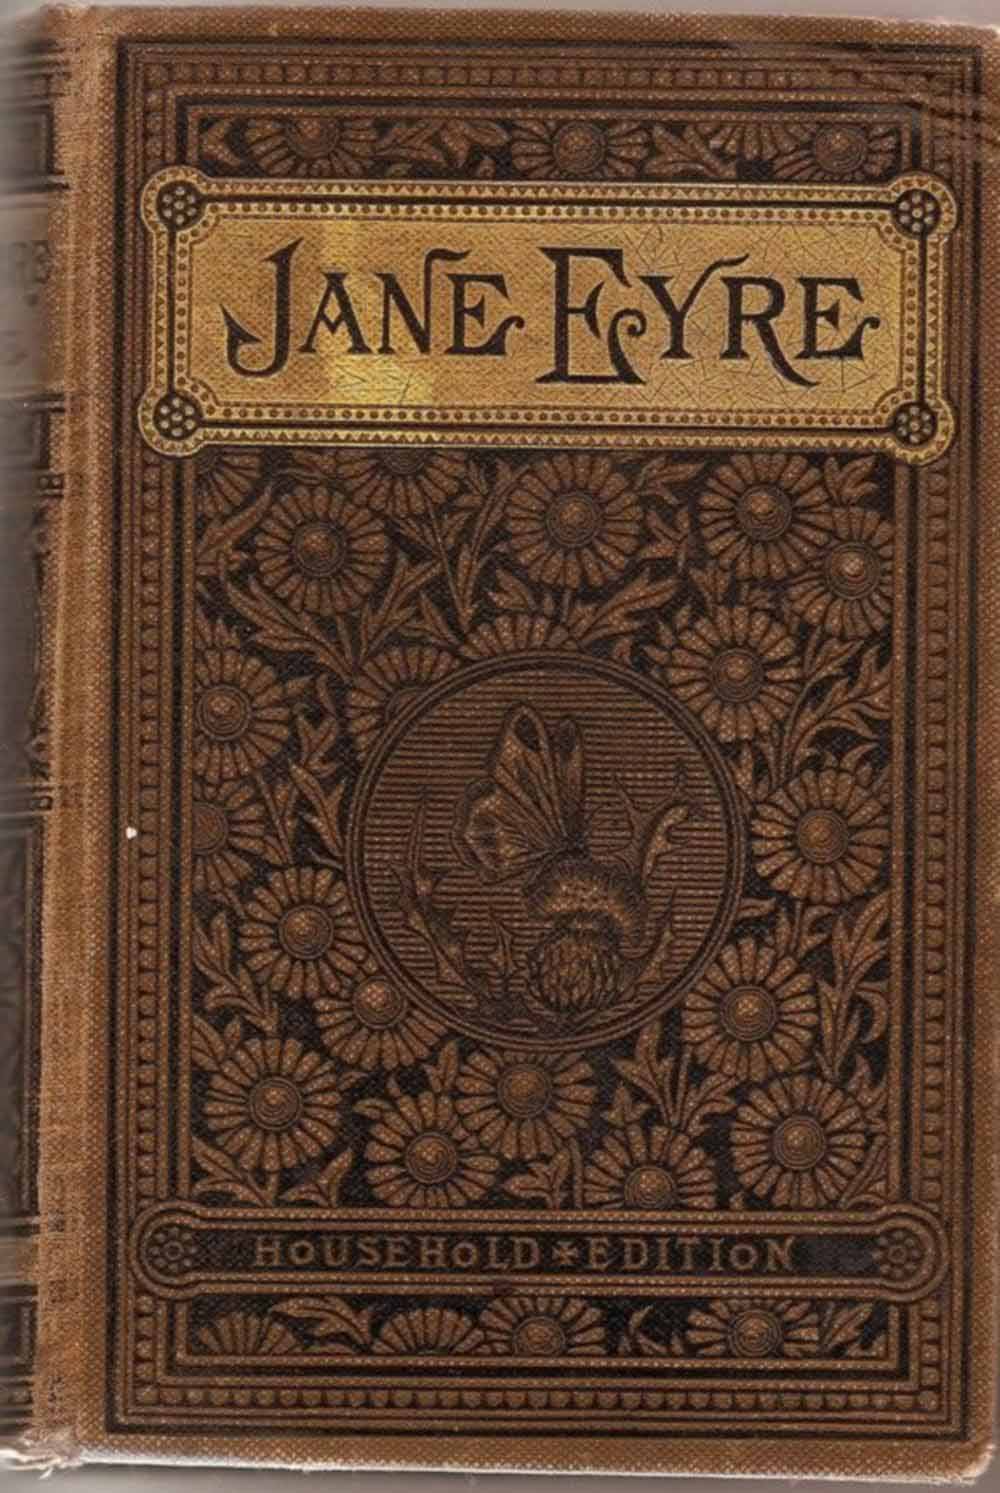 Jane Eyre Book Cover 1886